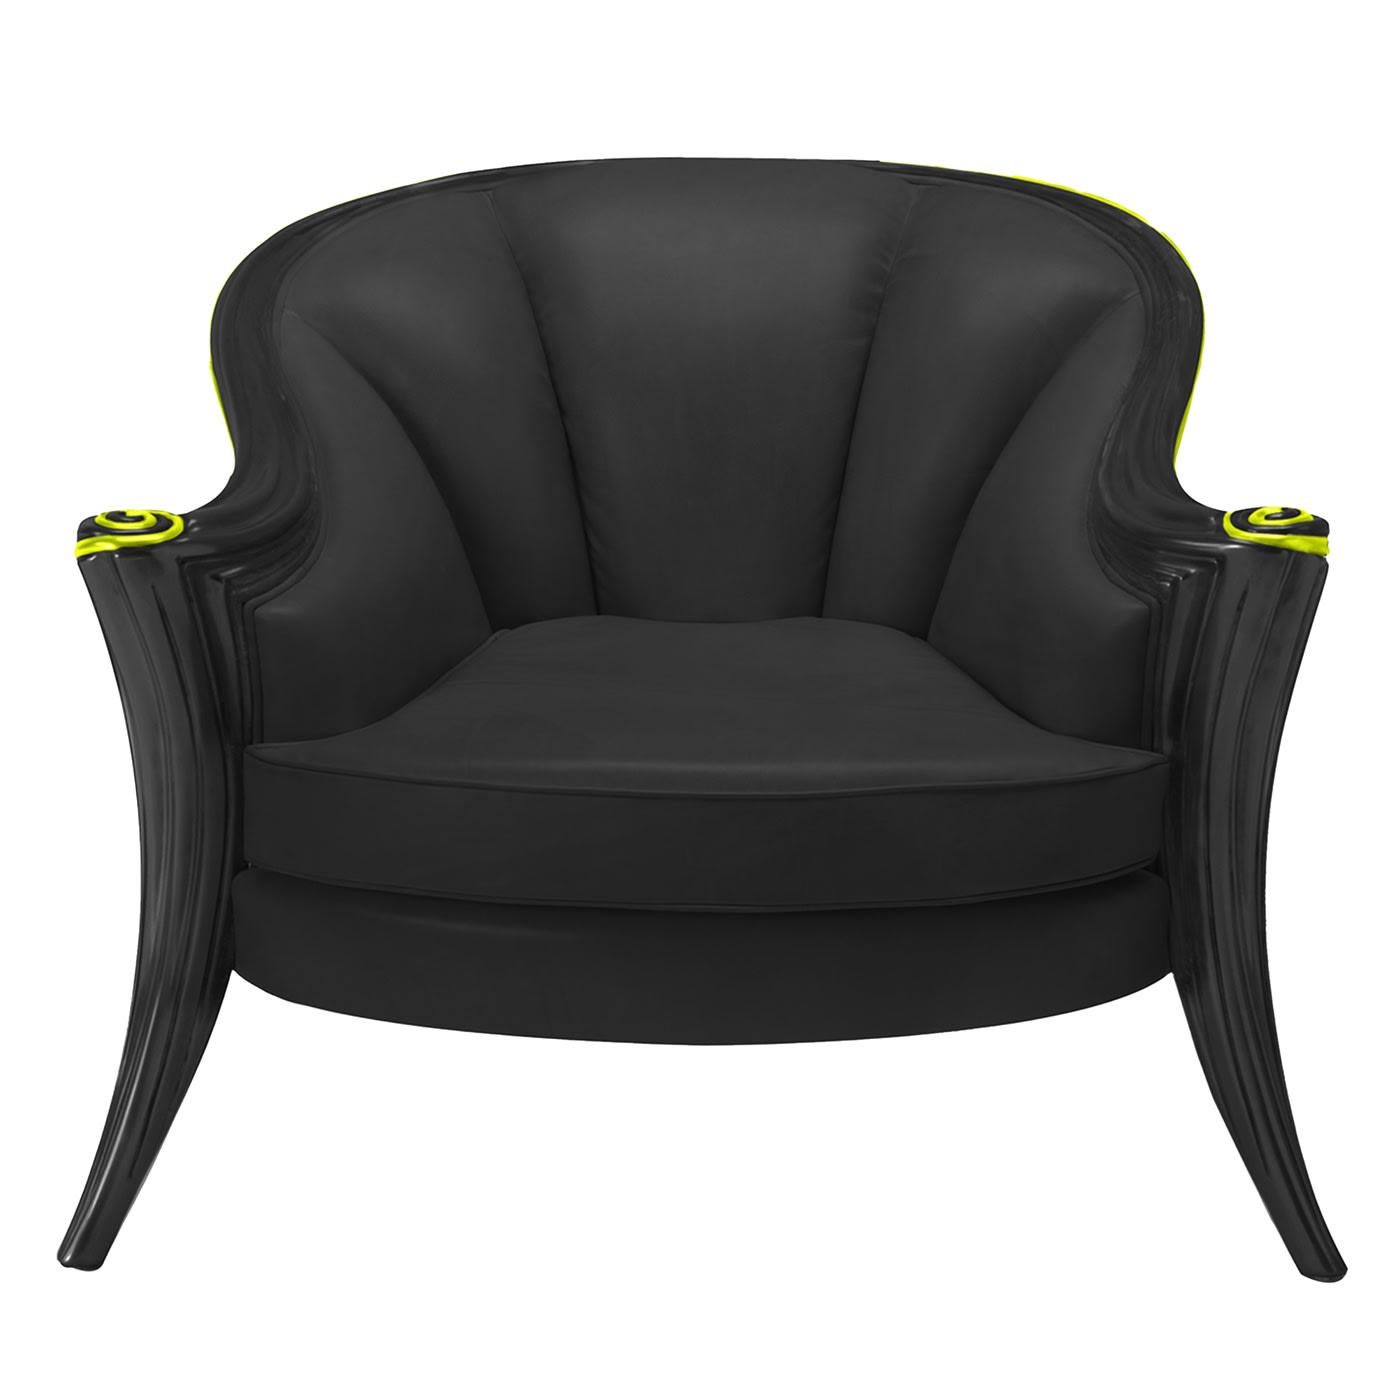 Thin profiles lacquered in lime green are the only chromatic contrast allowed for this plush armchair offered in an otherwise total-black look. Here enveloped in a prized black leather cover, the seat is marked by an elegant quilted design whose